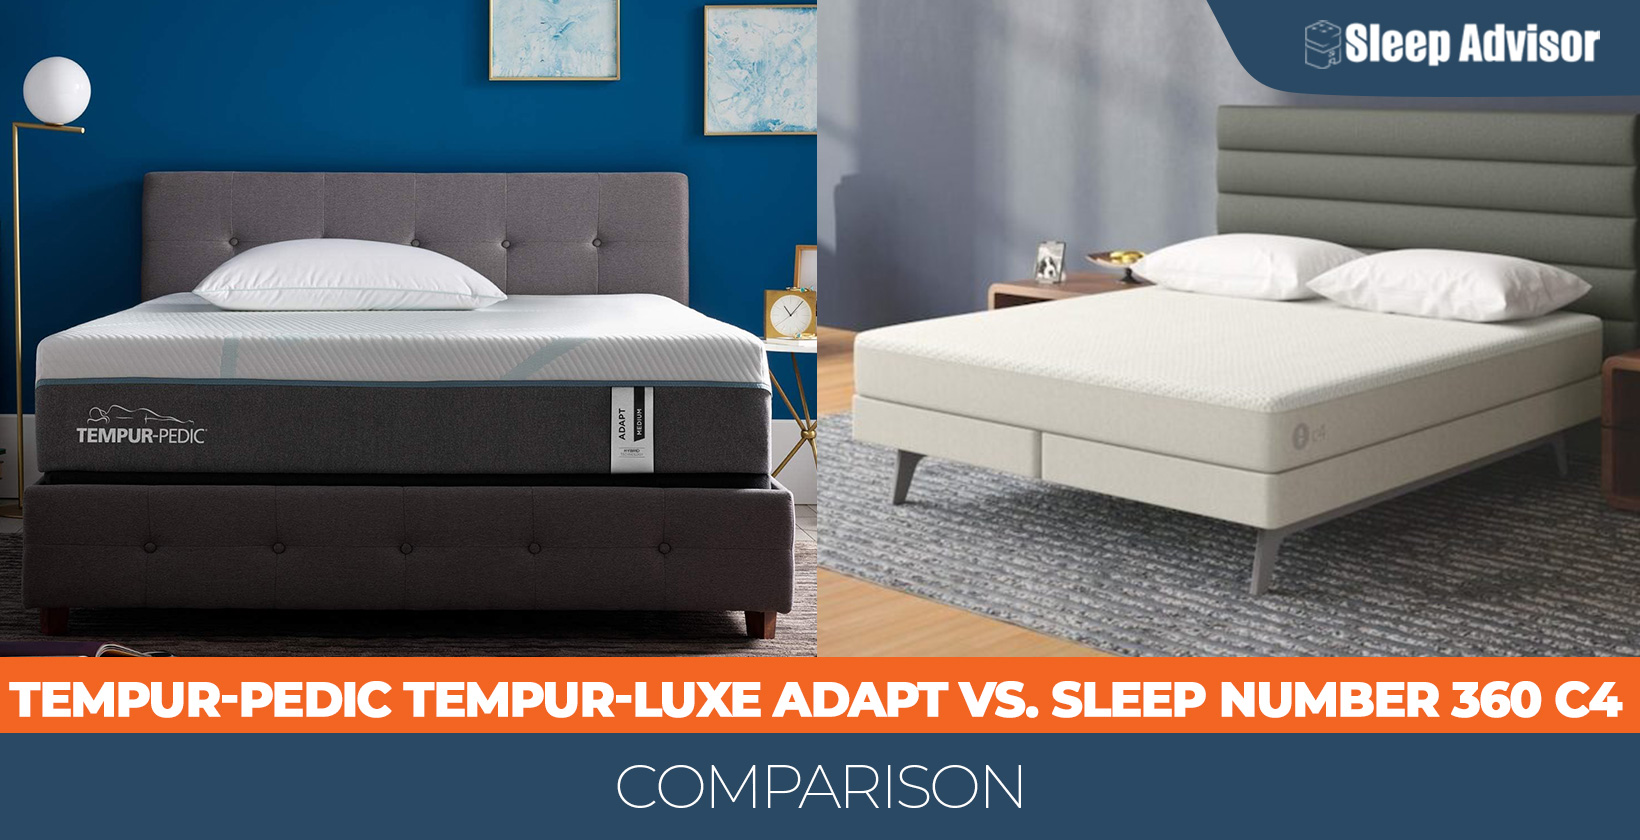 Our honest overview of the Tempur-Pedic TEMPUR-LuxeAdapt vs. Sleep Number 360 c4